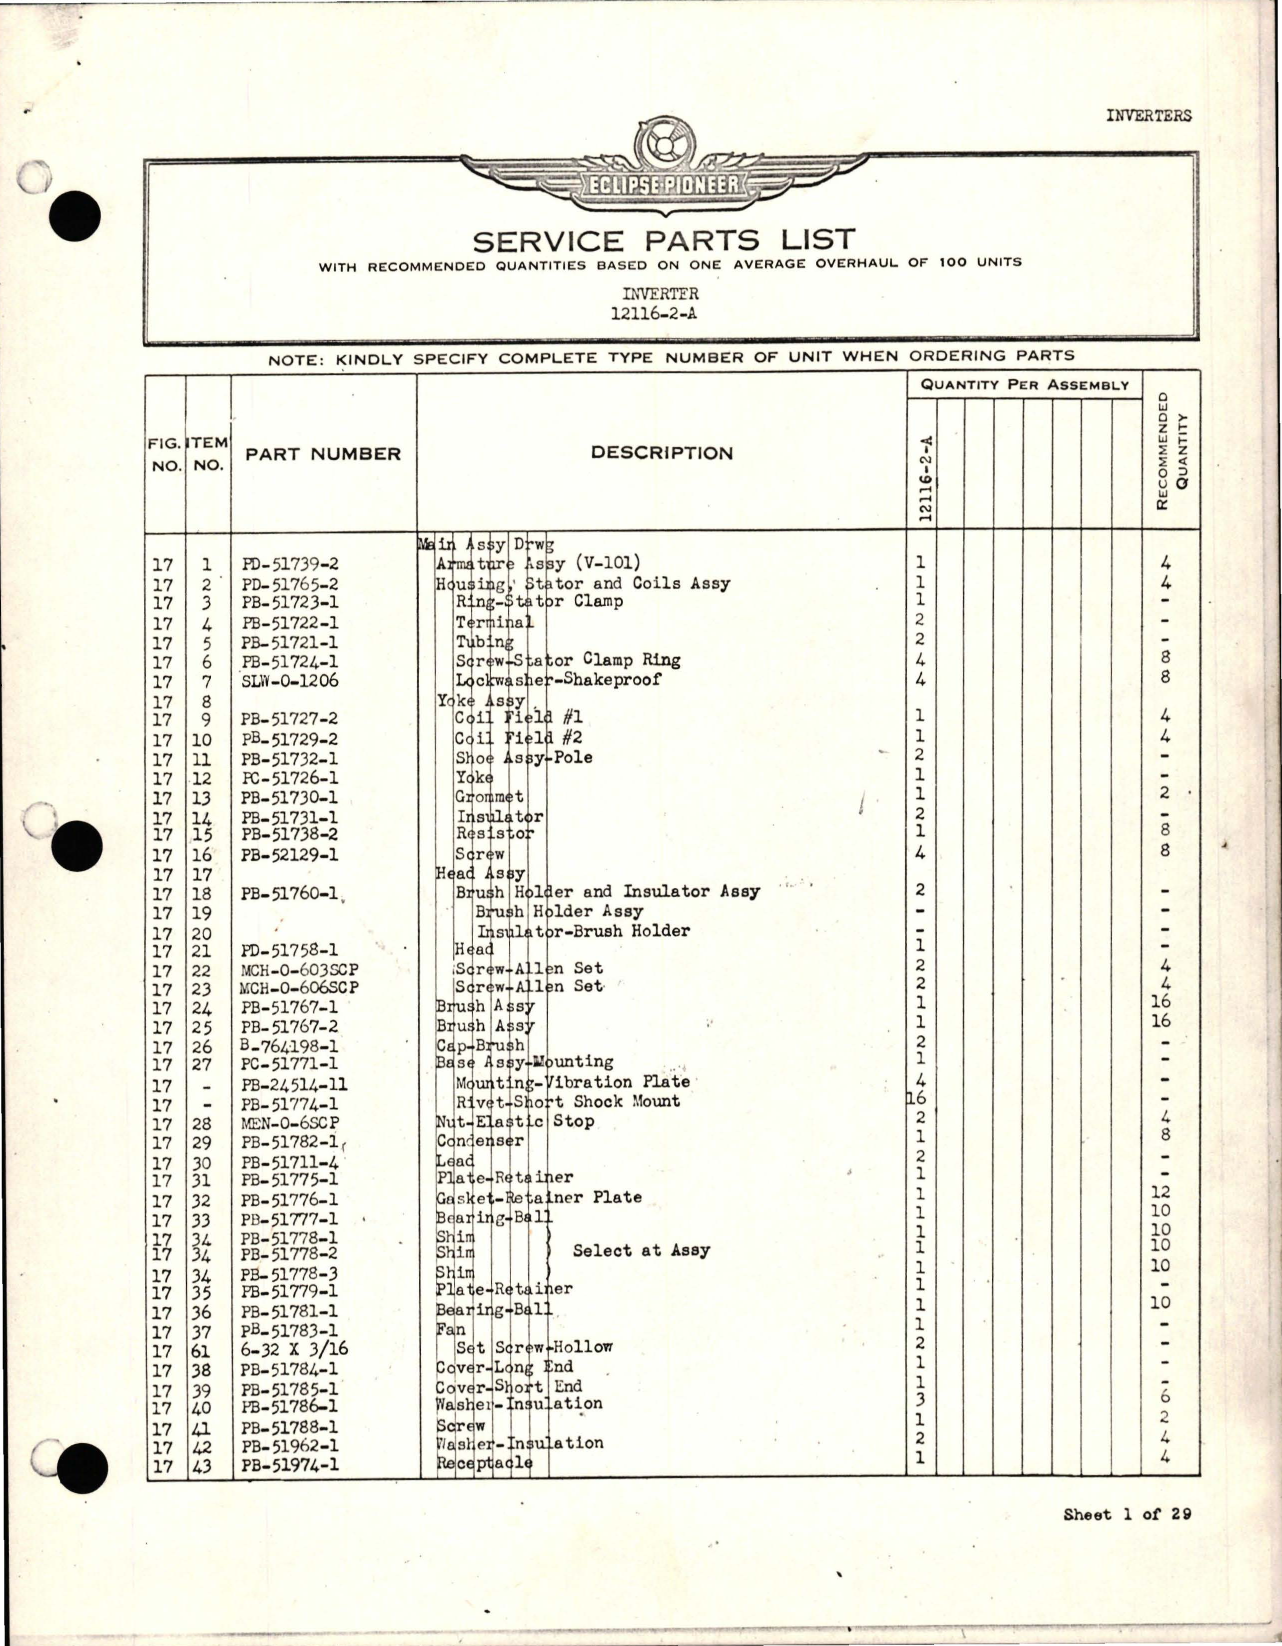 Sample page 1 from AirCorps Library document: Service Parts List for Inverter 